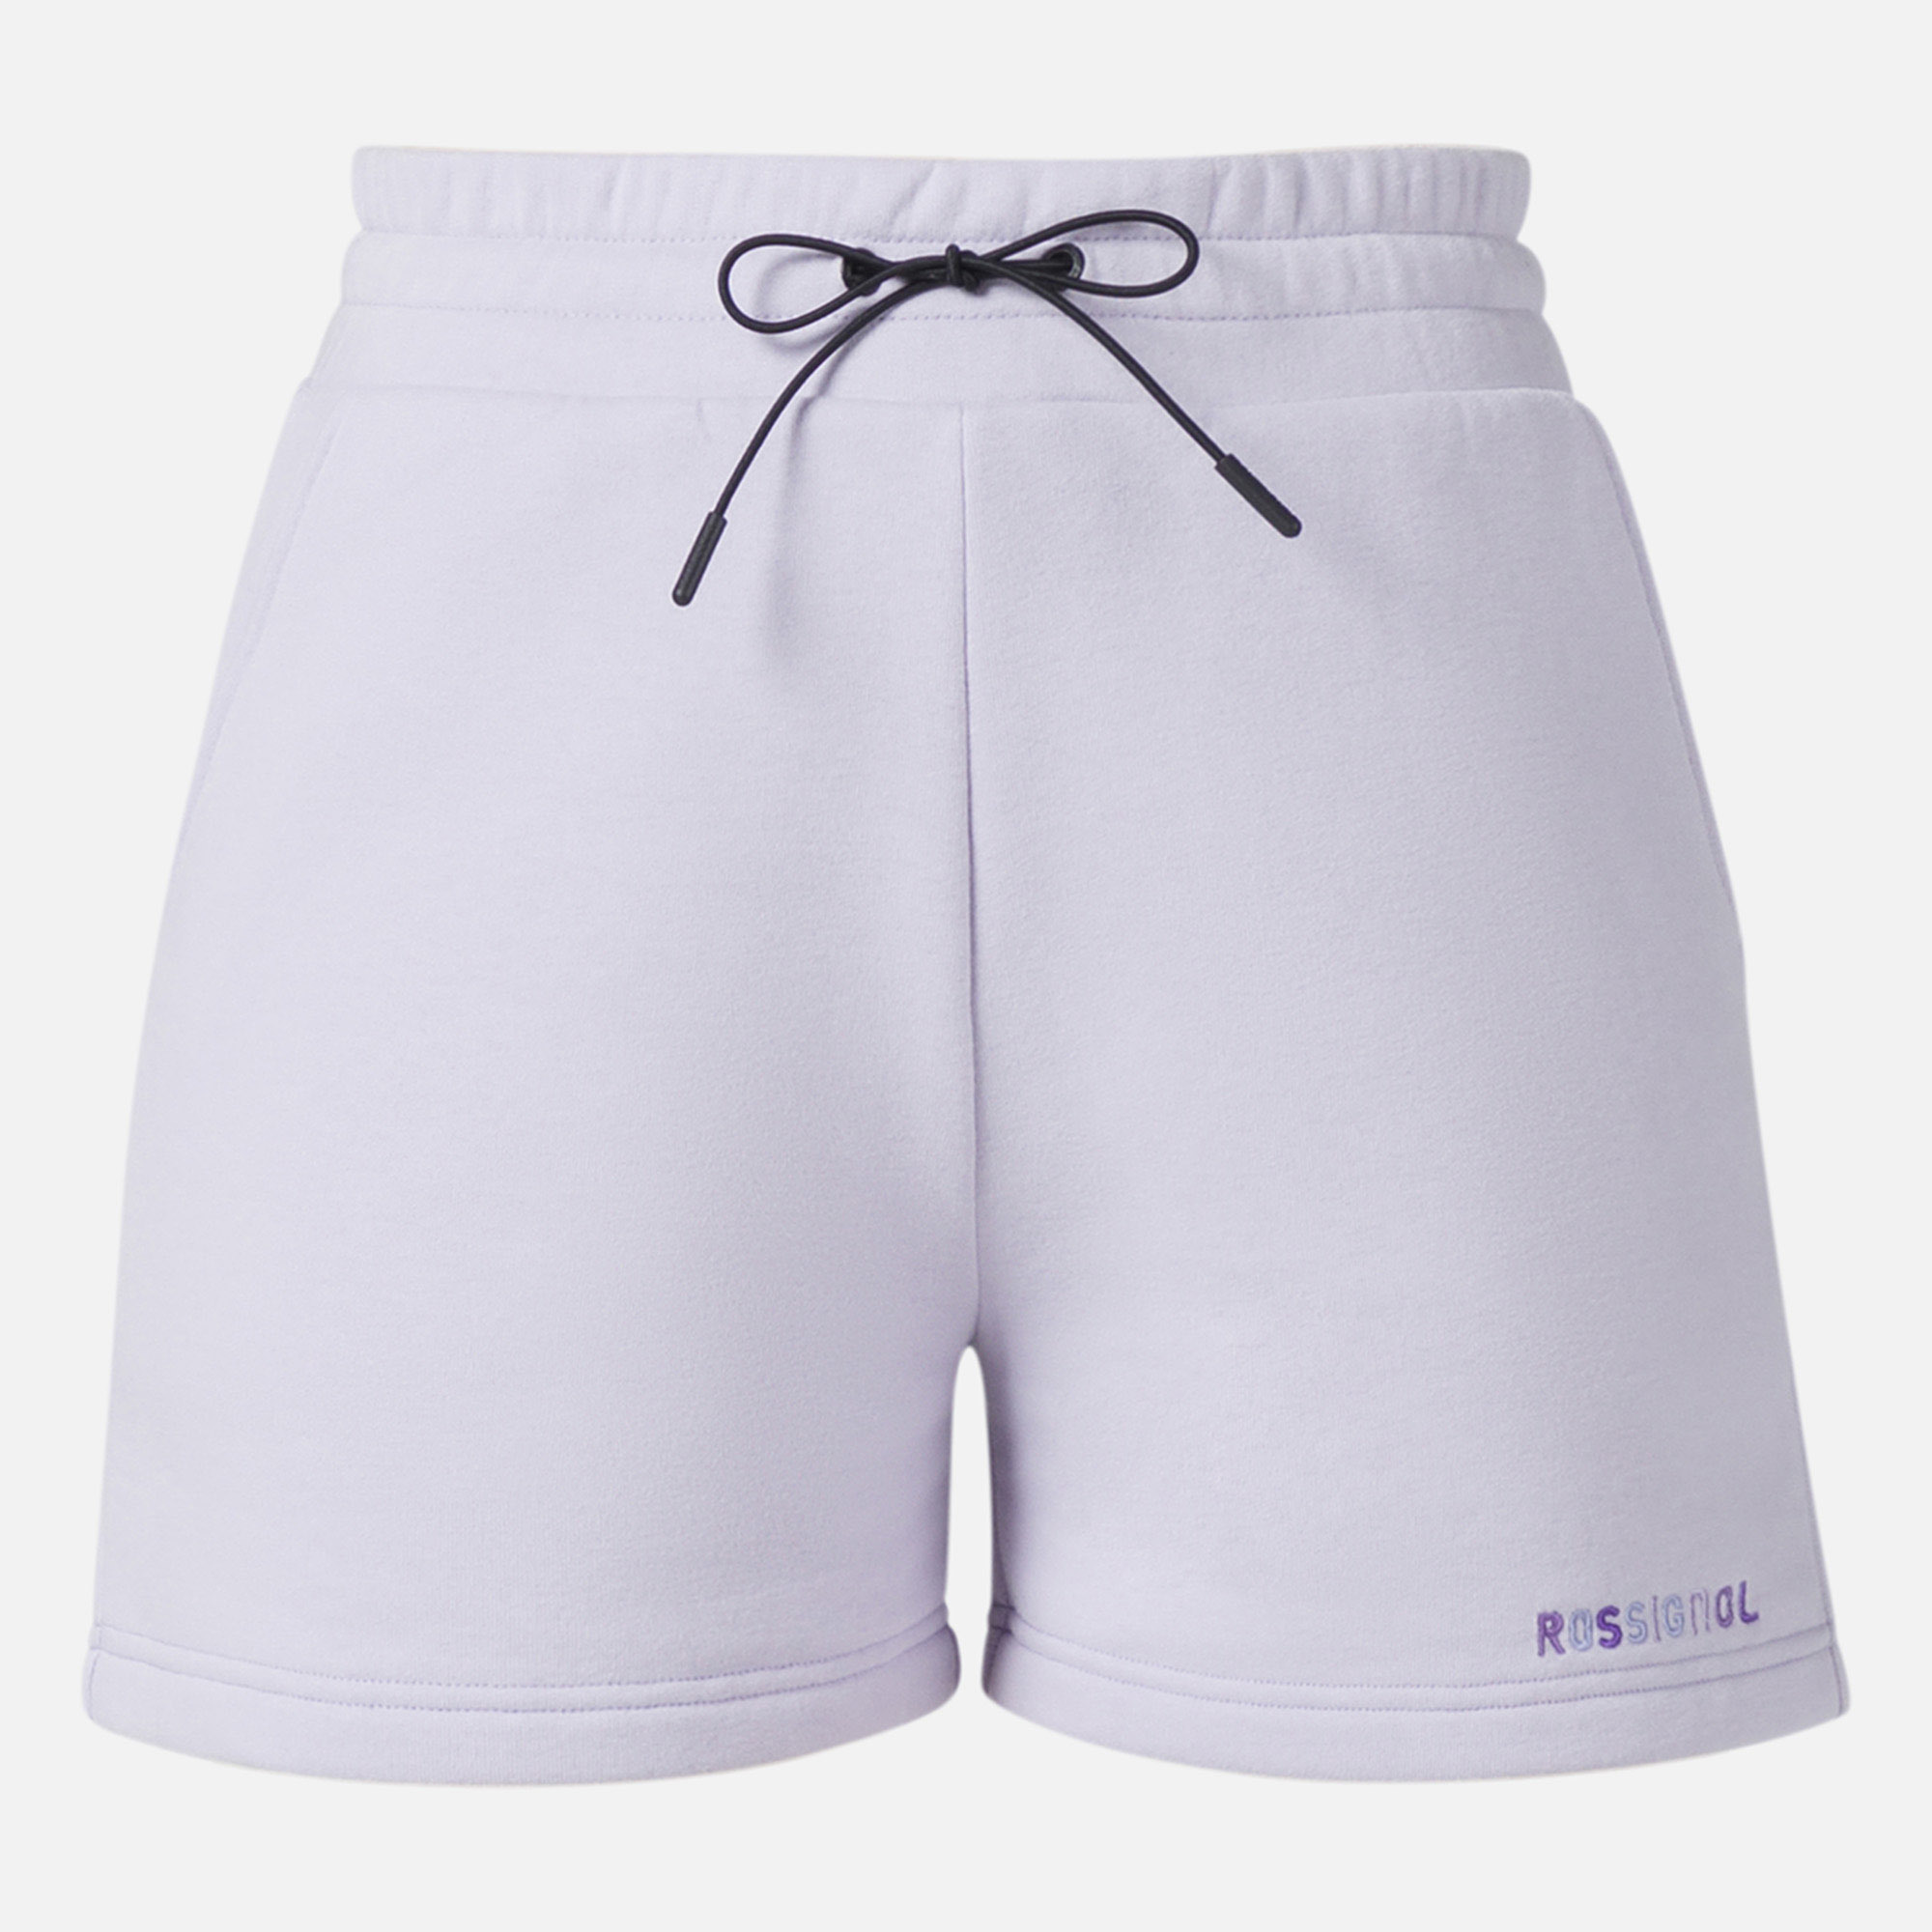 Women's Embroidery Shorts